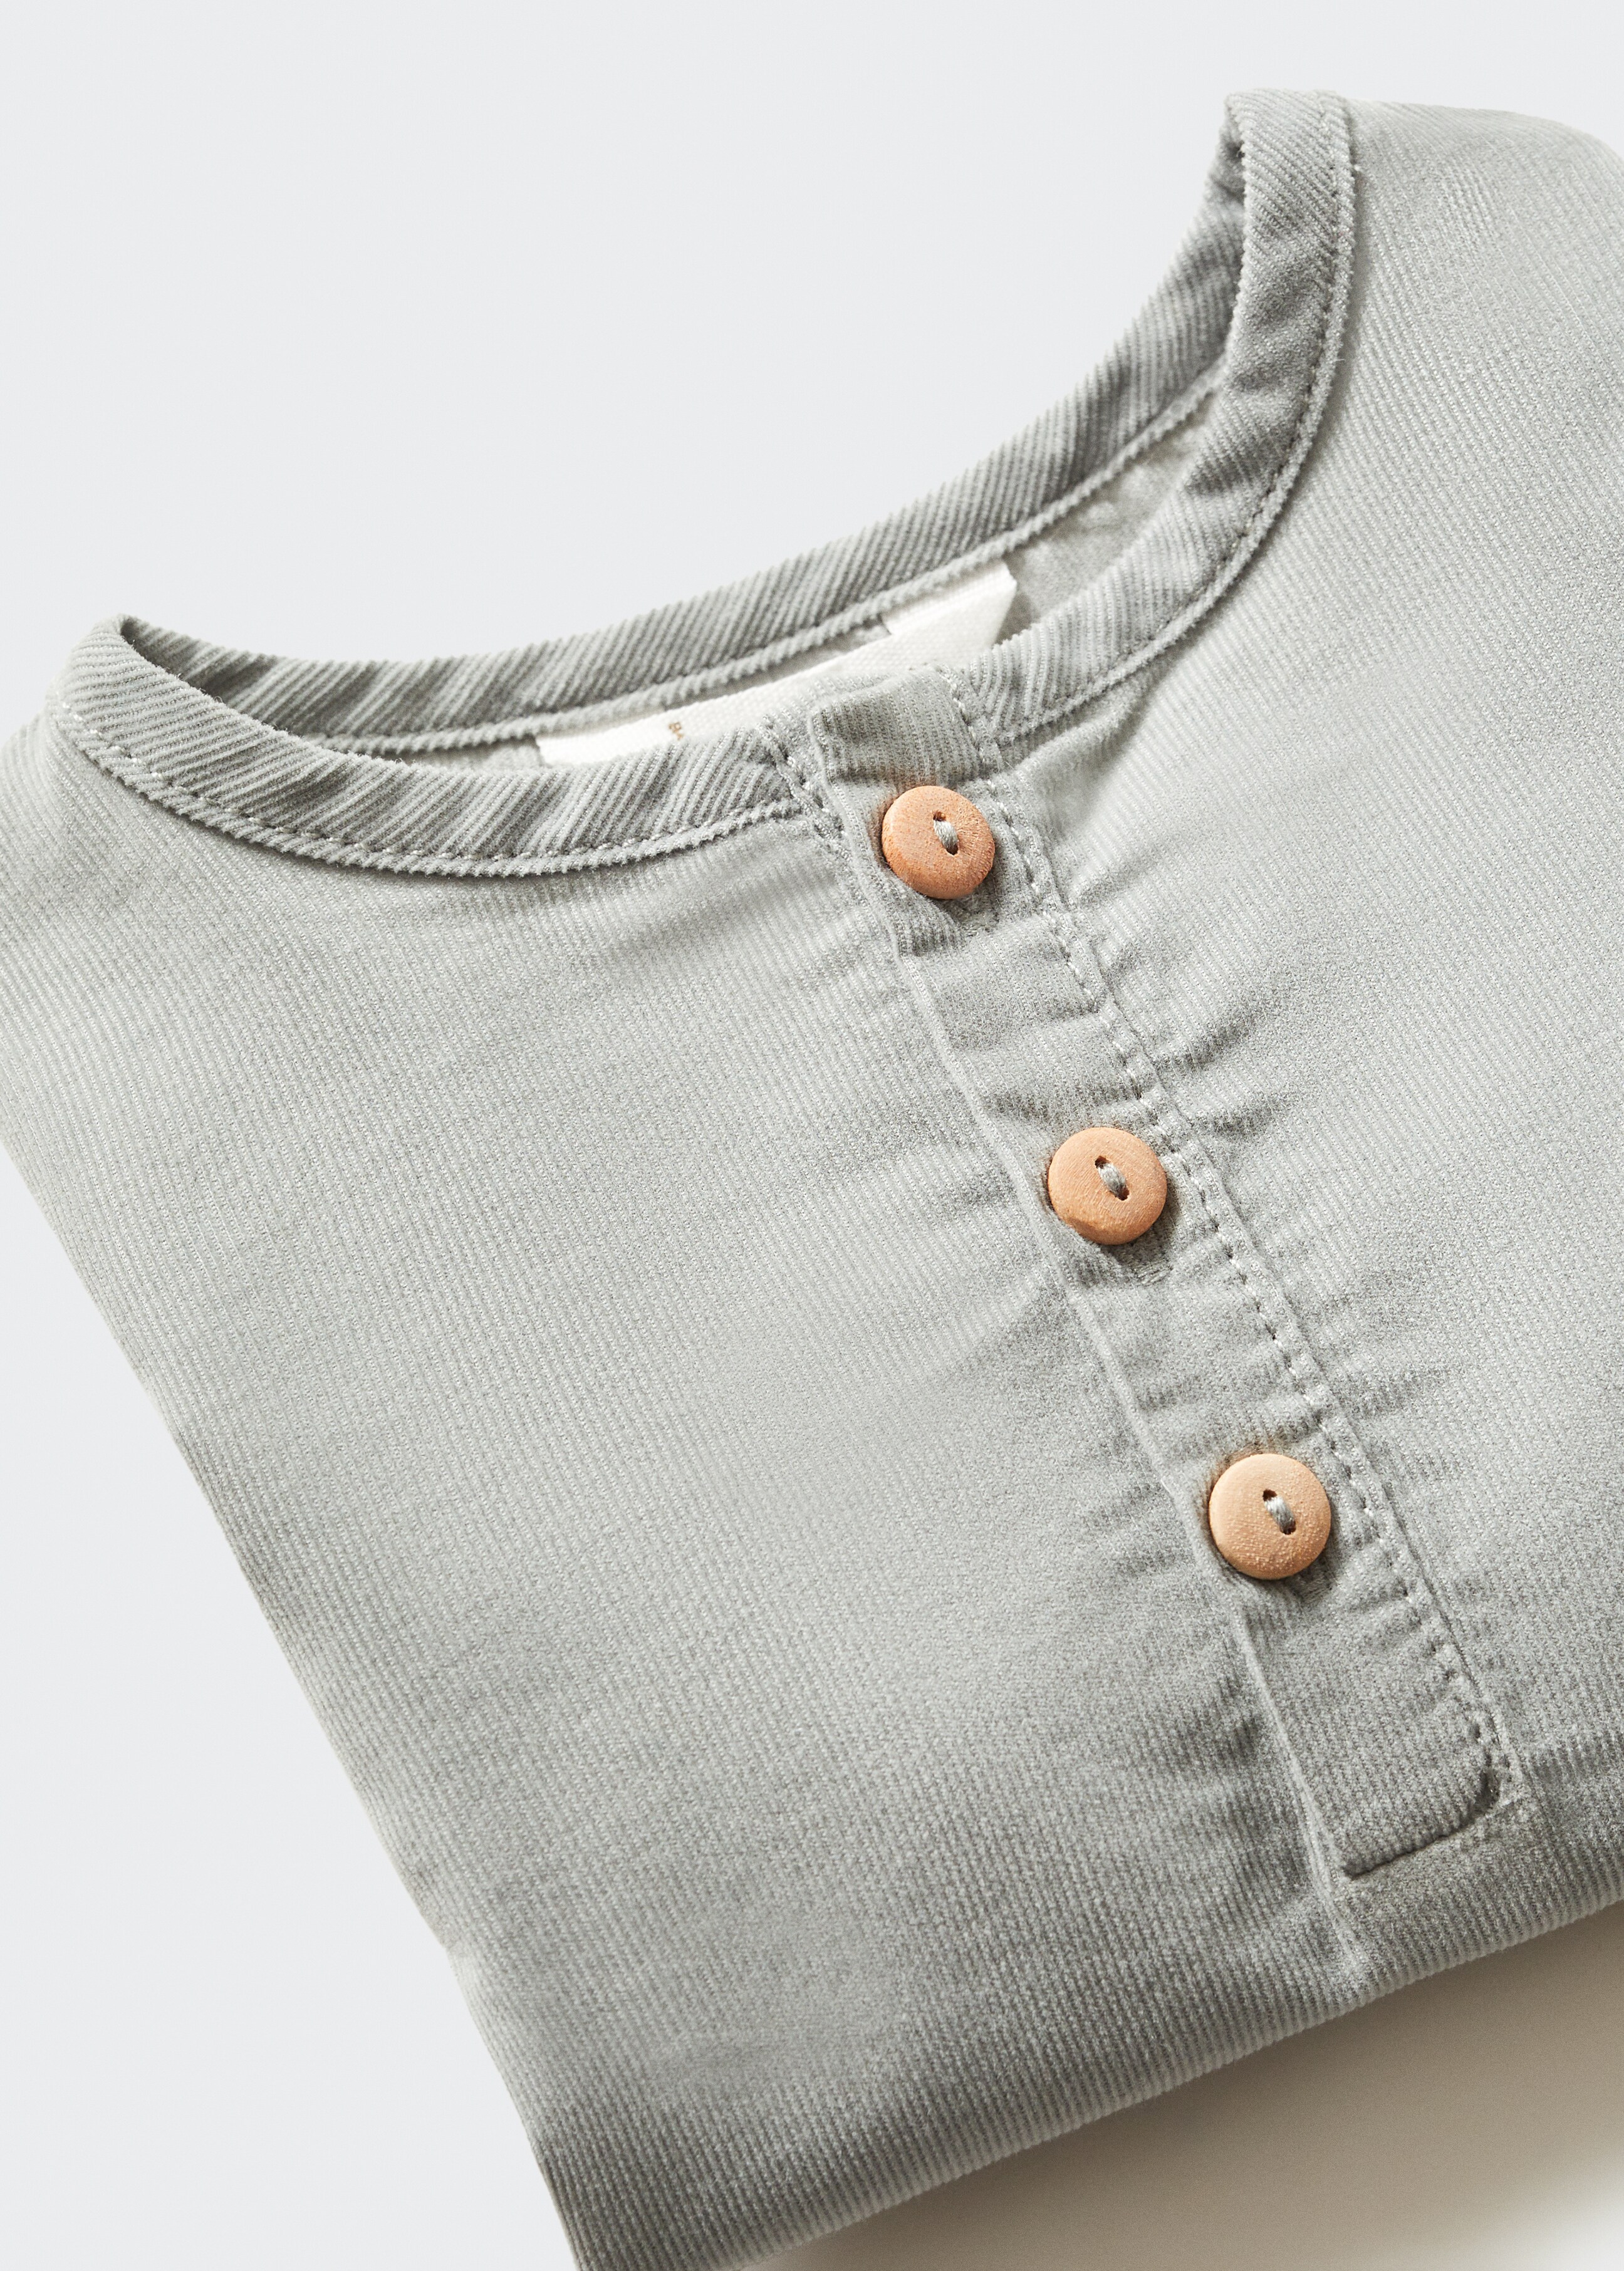 Buttoned cotton shirt - Details of the article 0